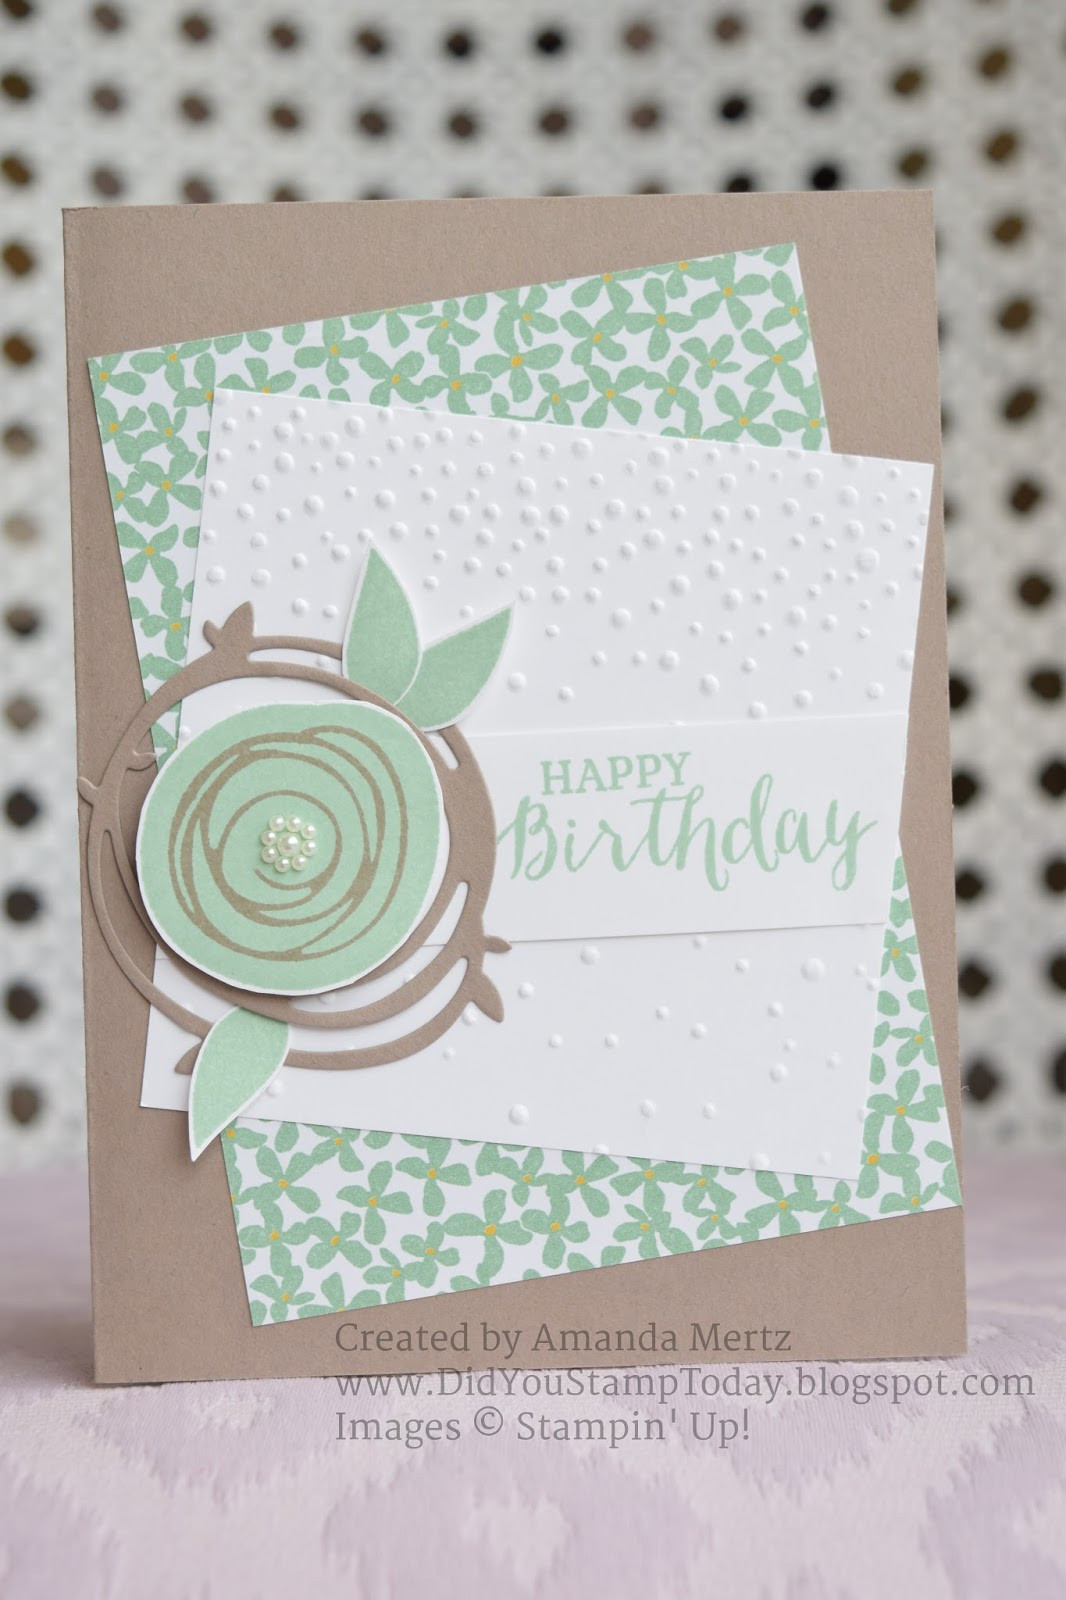 Stampin Up Birthday Cards
 Did You Stamp Today Swirly Birthday Stampin Up